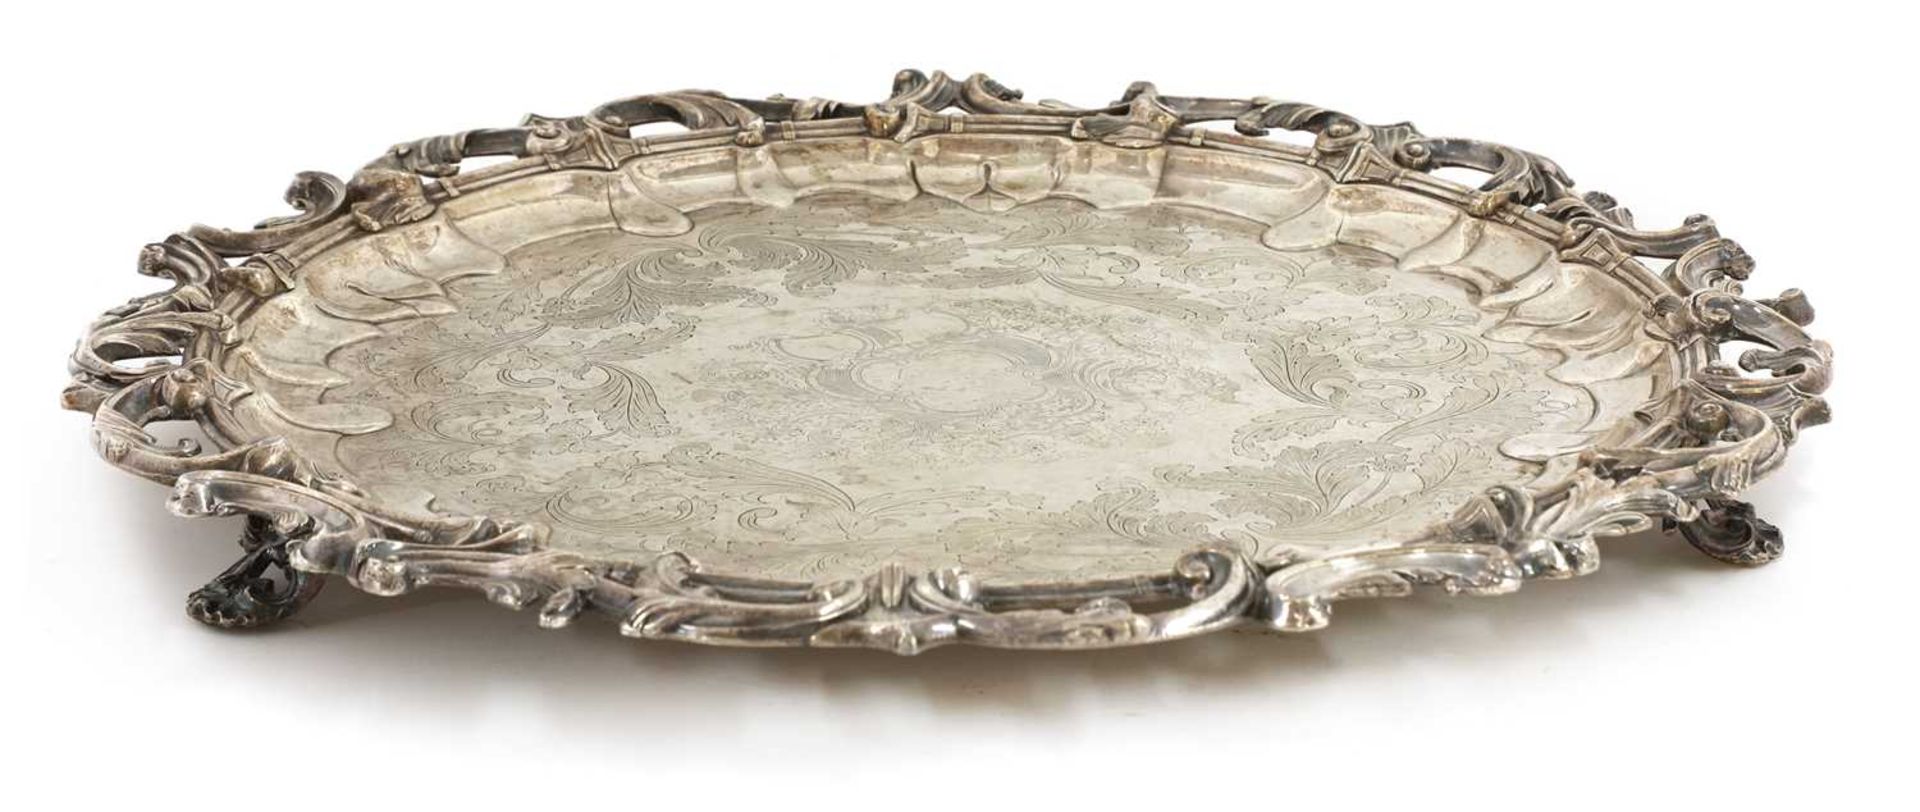 A large silver-plated circular tray, - Image 3 of 3